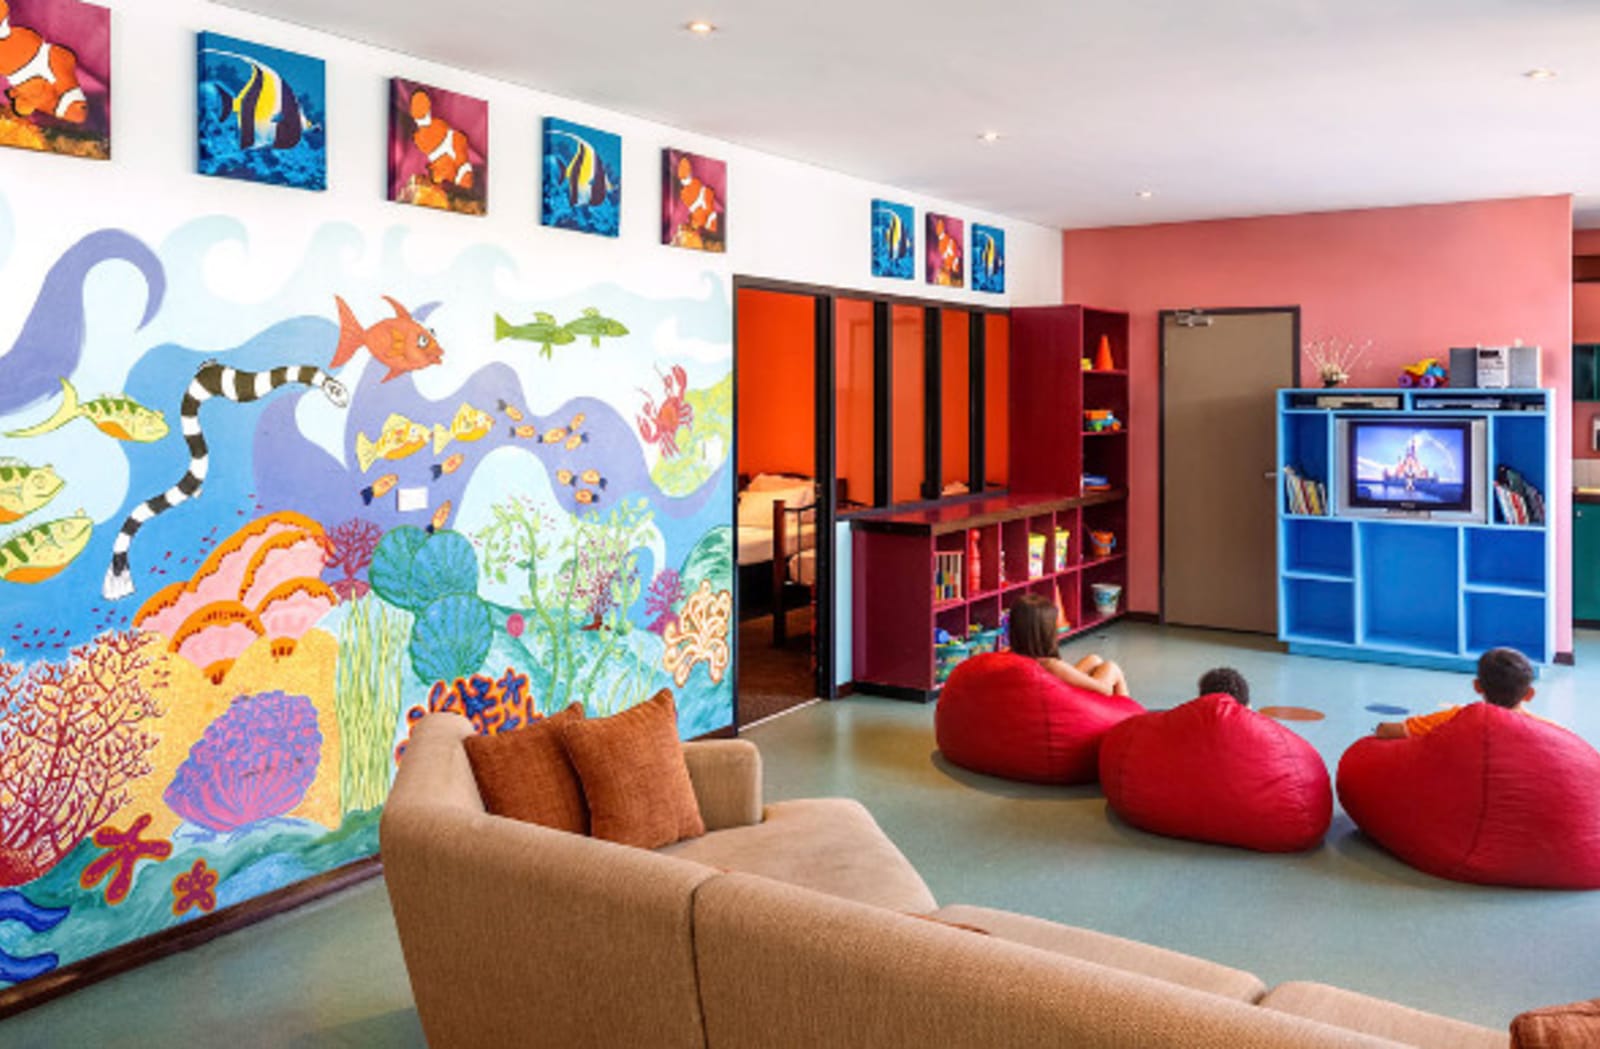  Children's playroom in a hotel